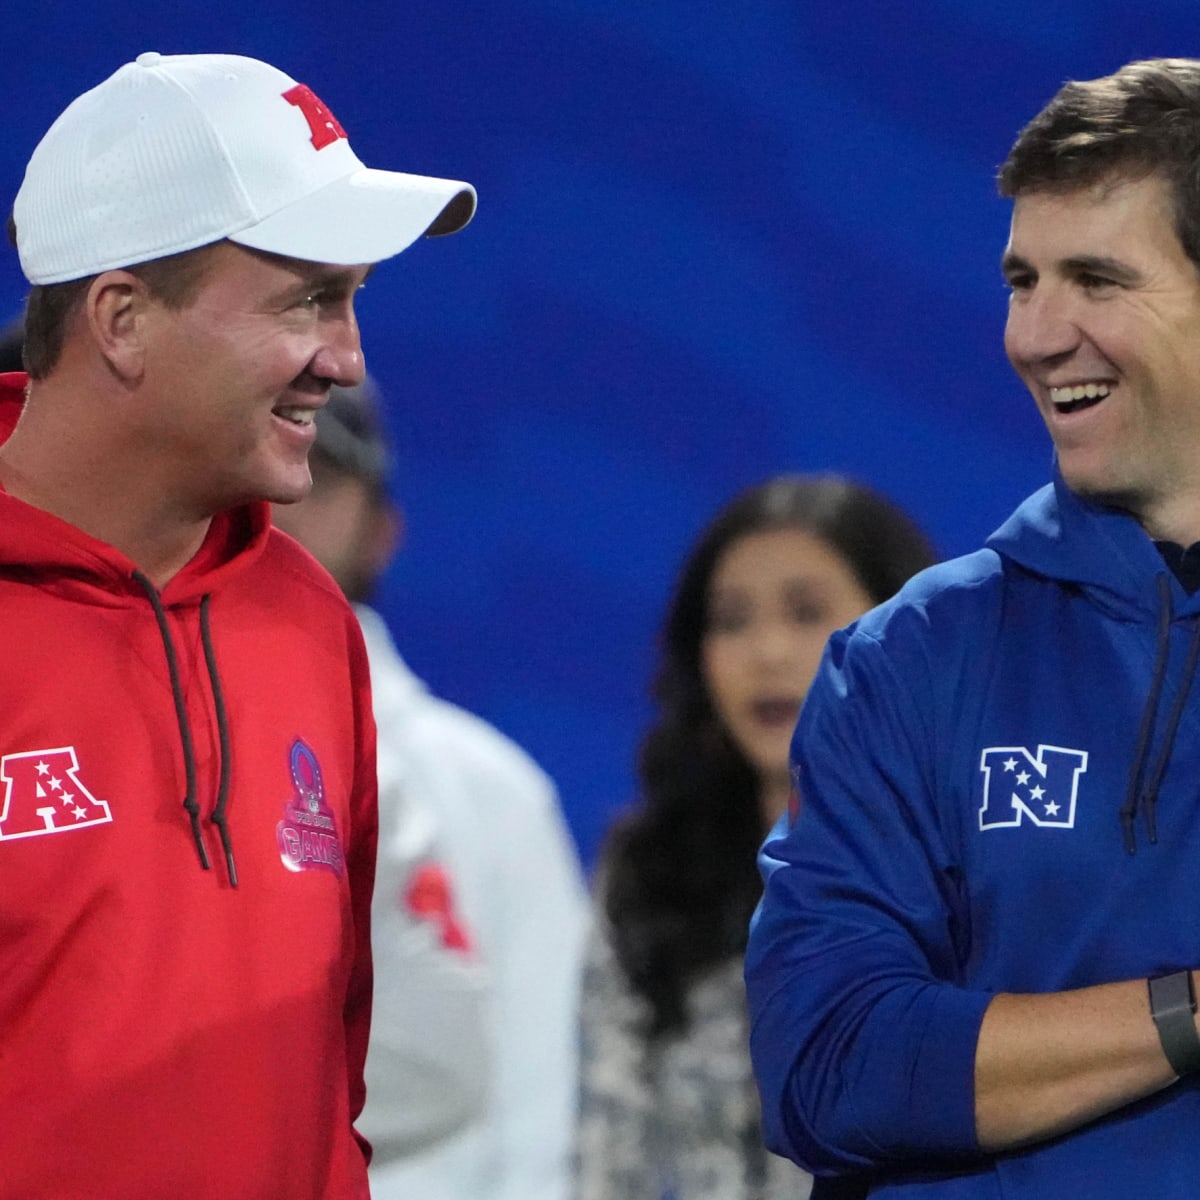 Peyton and Eli Manning on 'Monday Night Football': How to watch